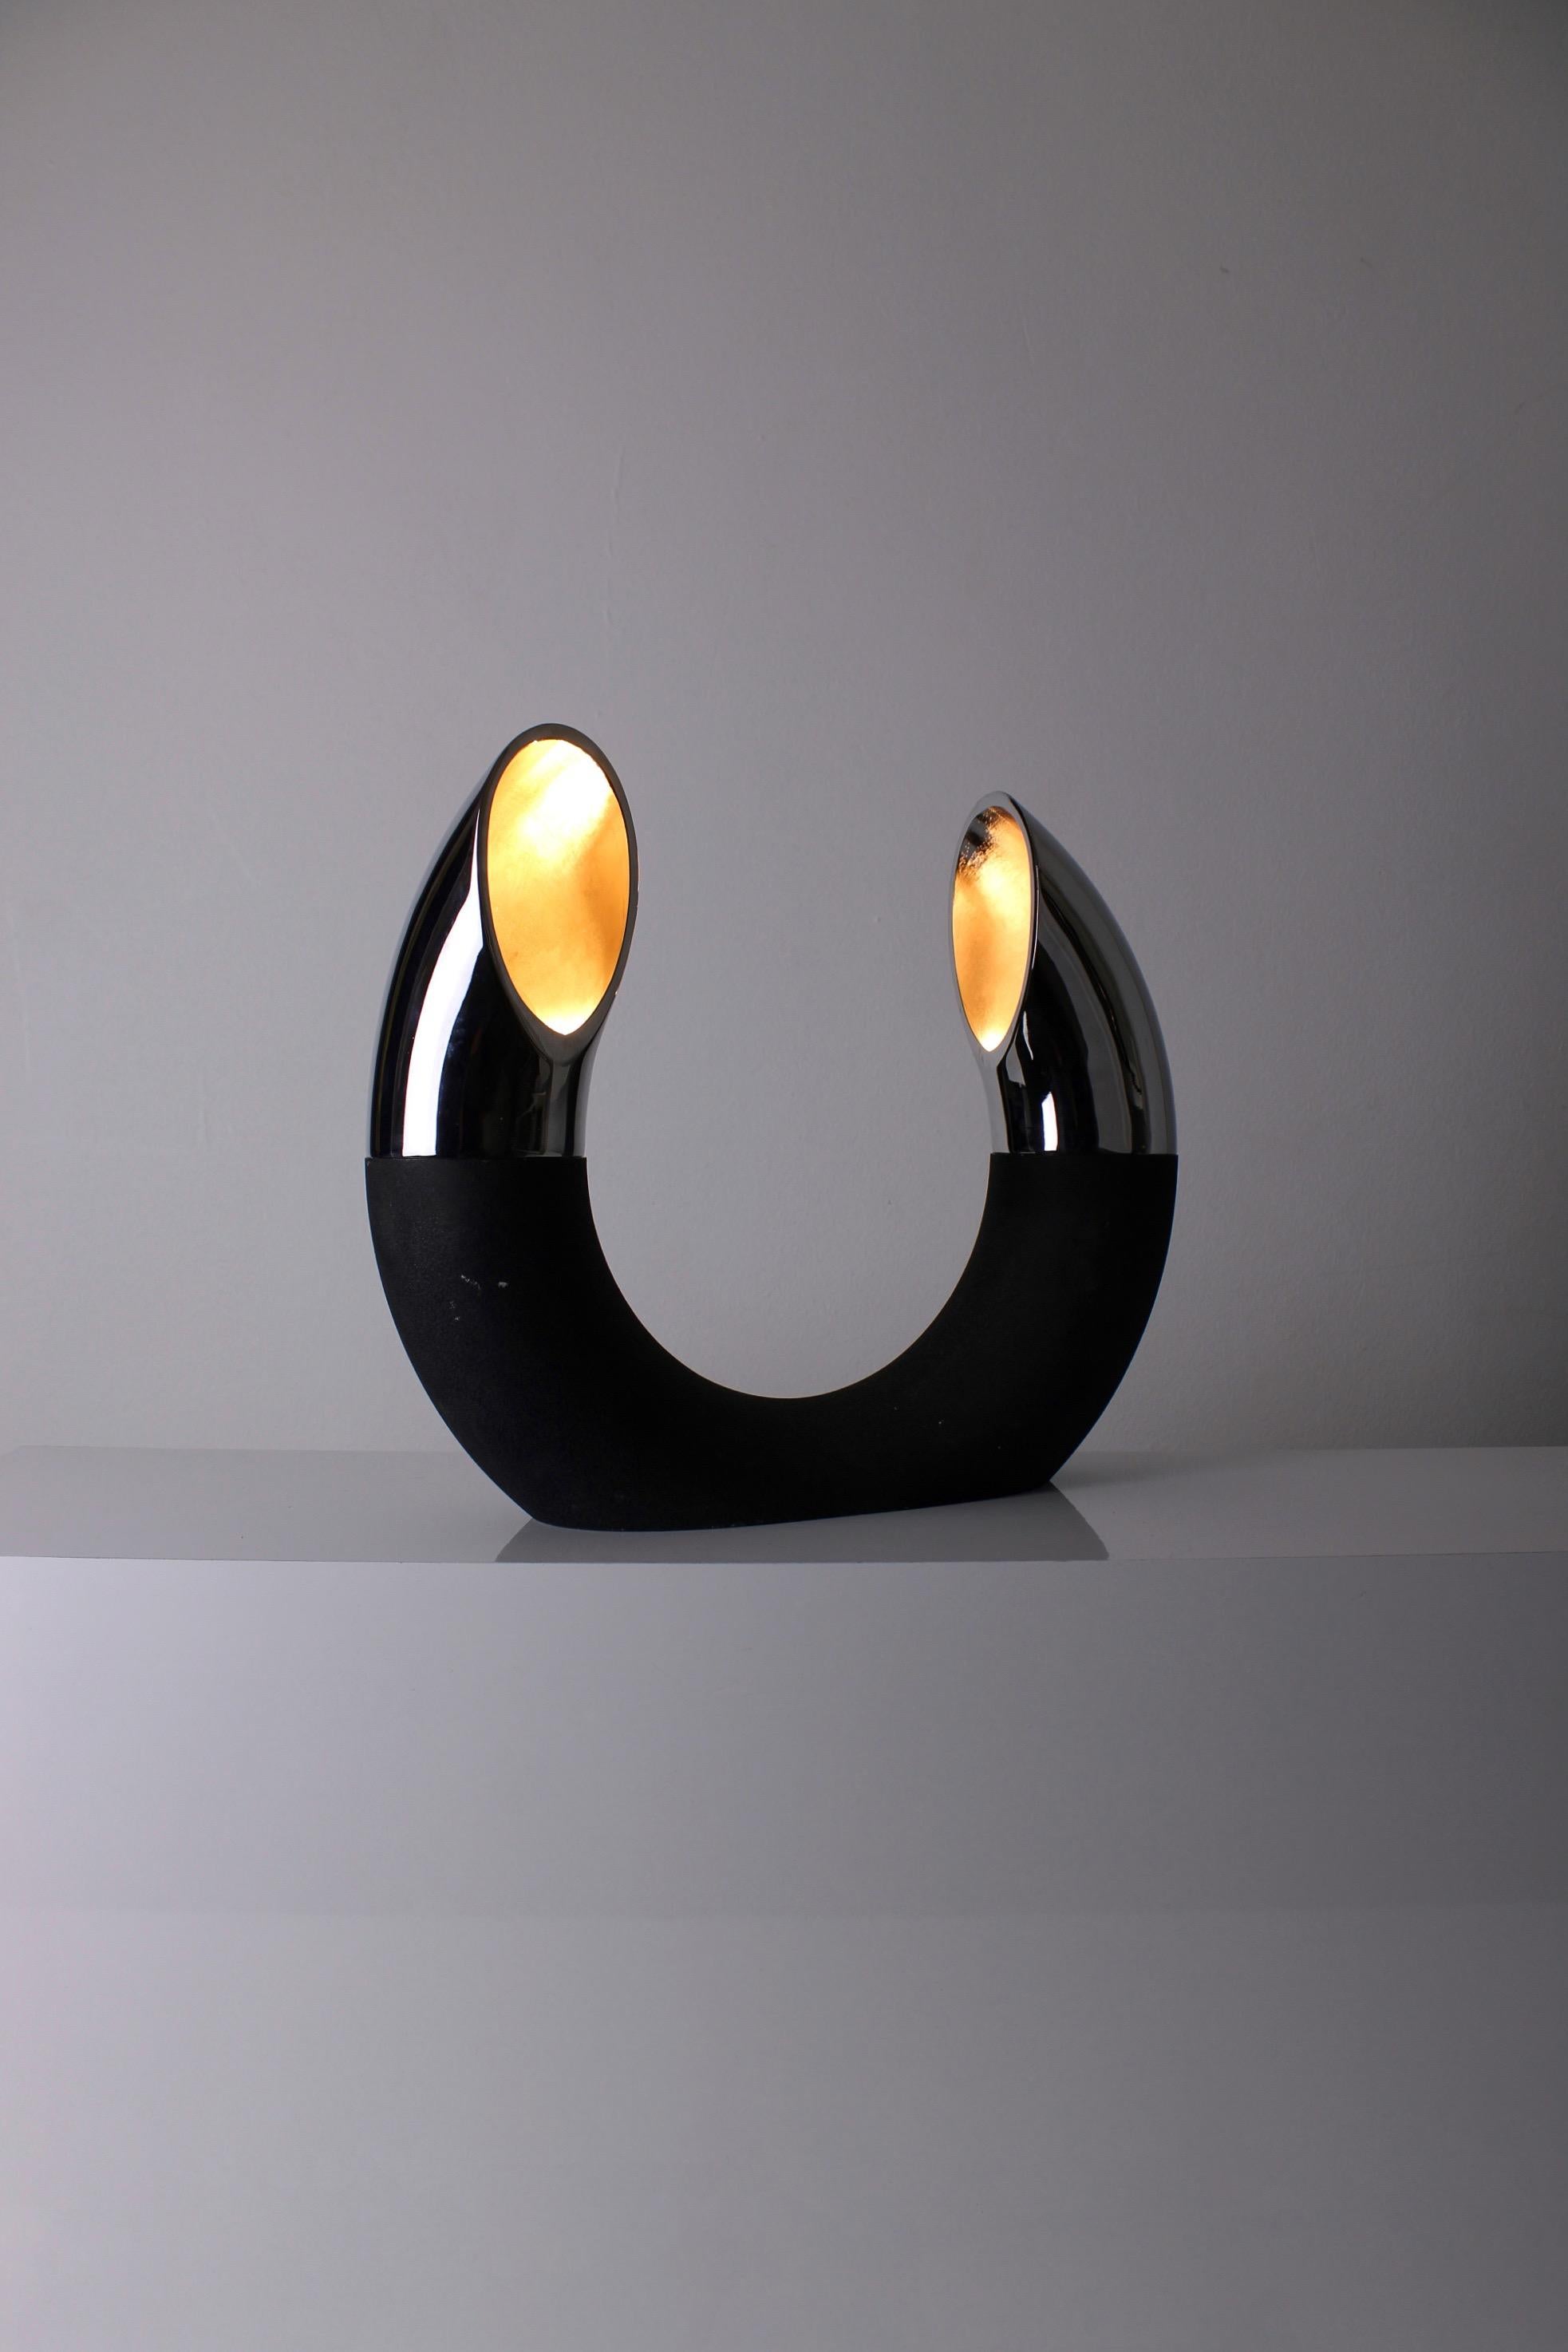 Very sculptural-shaped table lamp. Produced by Fratelli Martini (the Martini Brothers) in Italy. Some designers that worked for Flli. Martini were E. Bosi, Bertotti and Martini himself. This table lamp has a black lacquered cast iron U-shaped